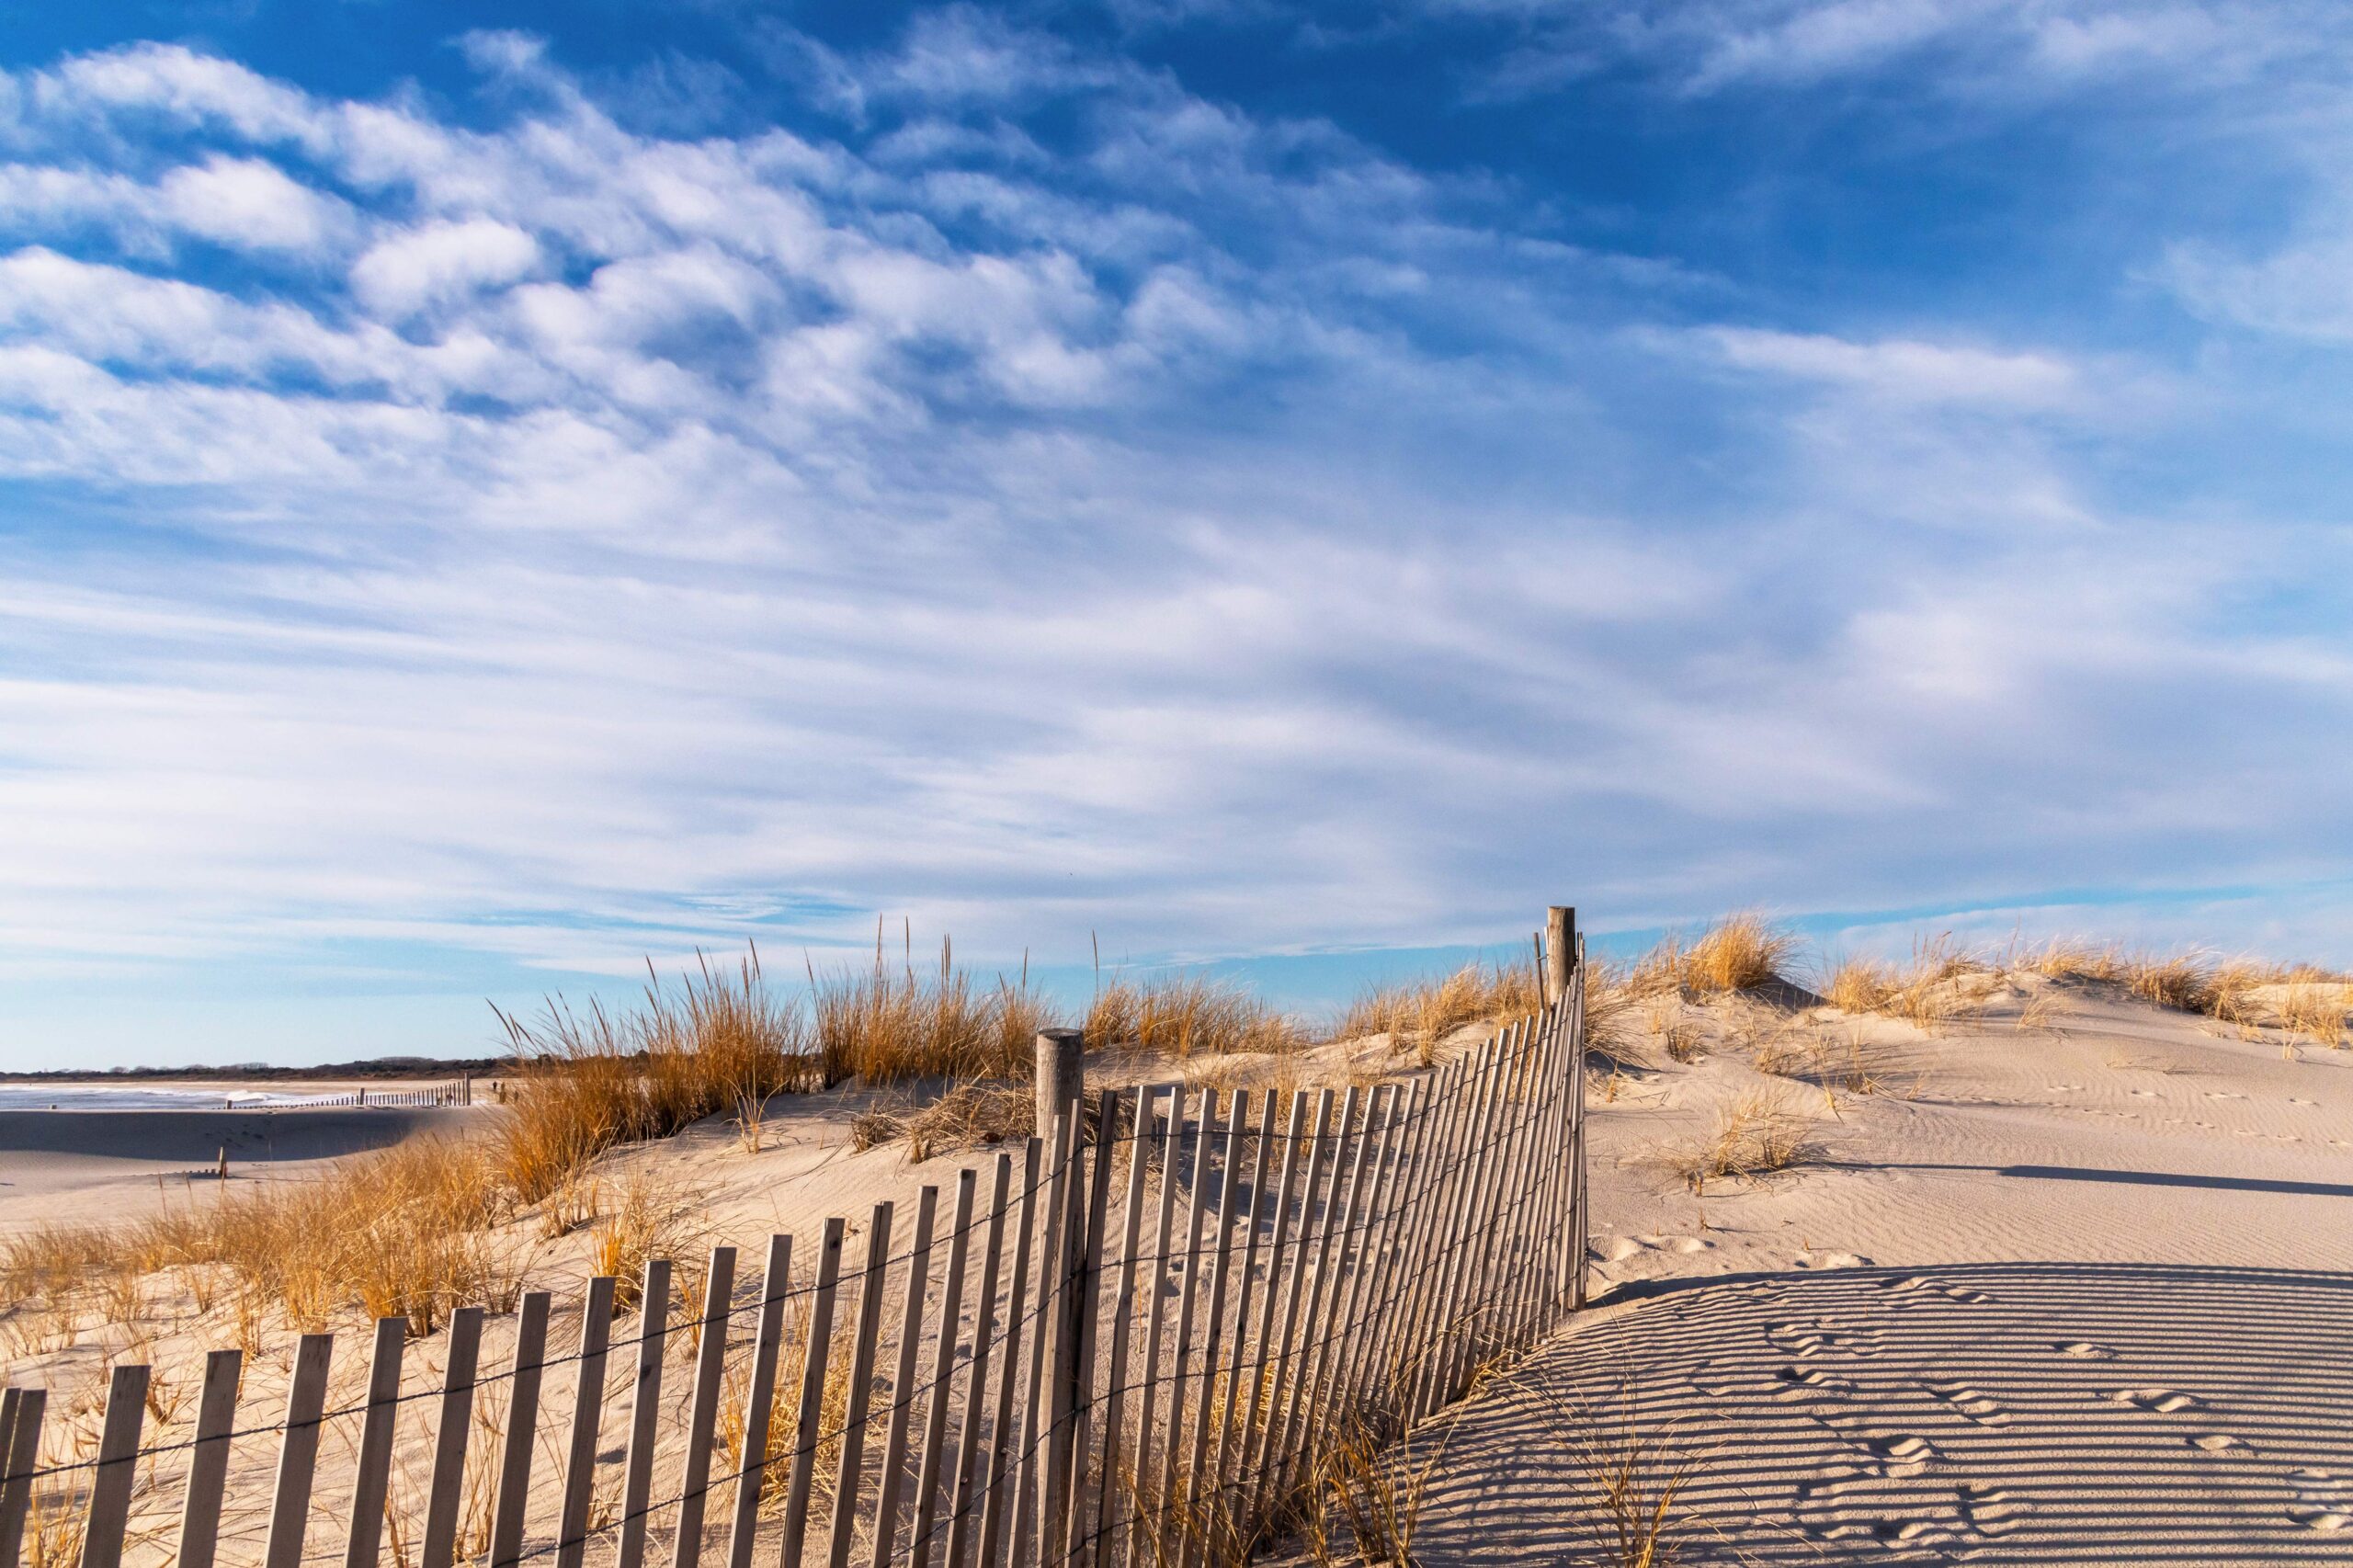 The dunes and fence at the beach with white wispy clouds in a blue sky